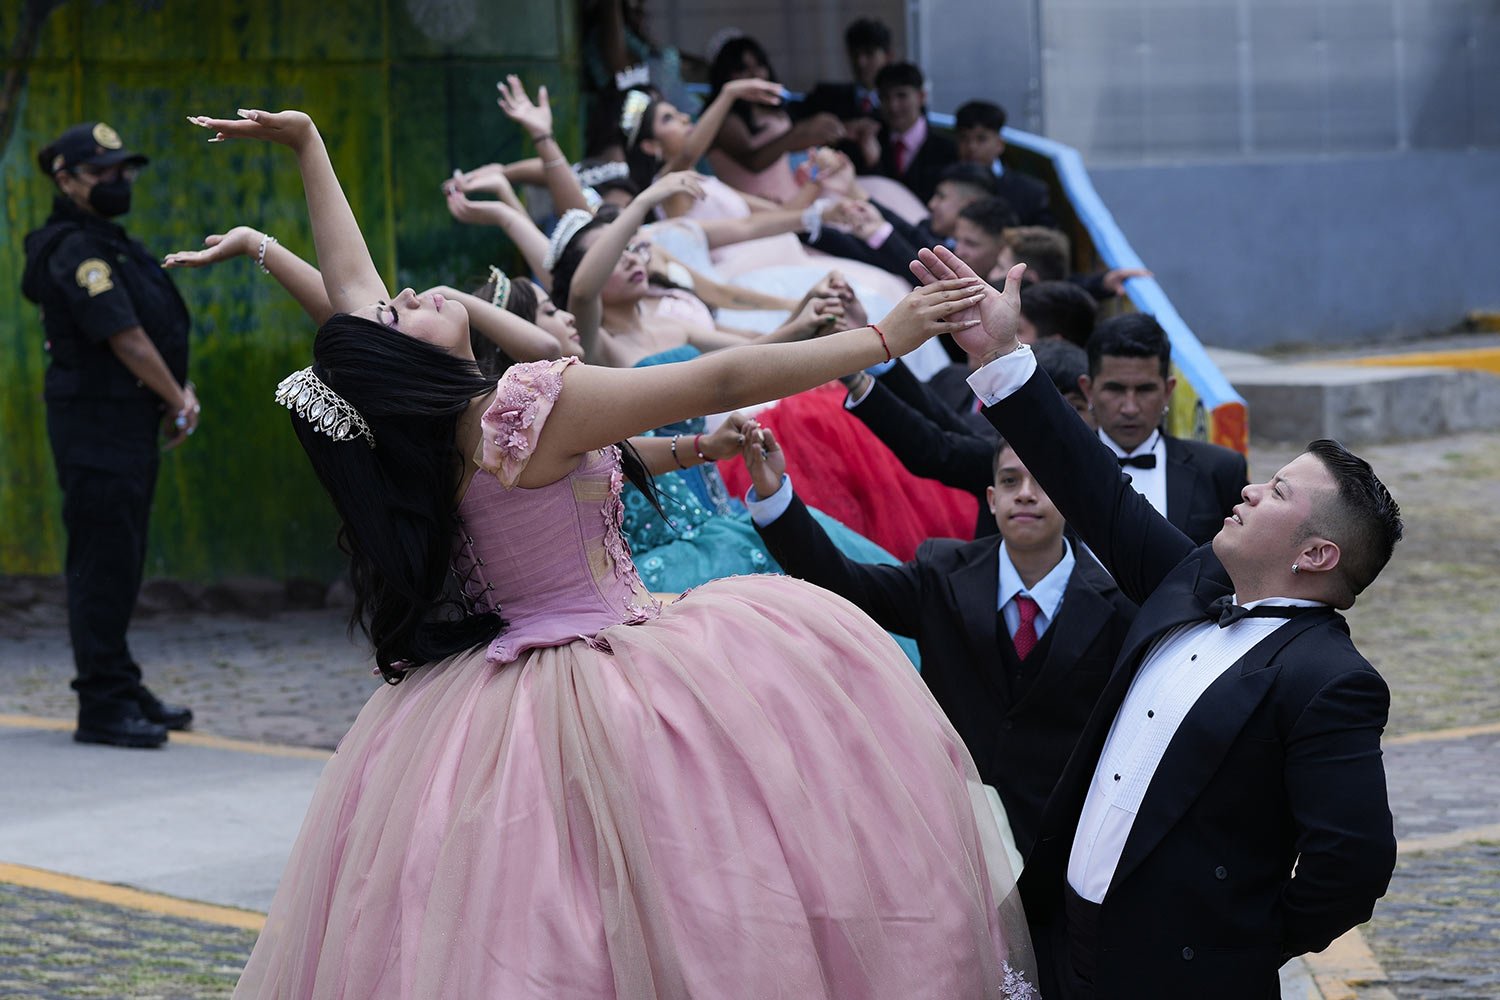  The daughters of imprisoned mothers celebrate their 15th birthday, or quinceaneras, at the San Marta Acatitla rehabilitation center for women in Mexico City, Aug. 18, 2023. The event aims to help keep connected the families of jailed women. (AP Phot